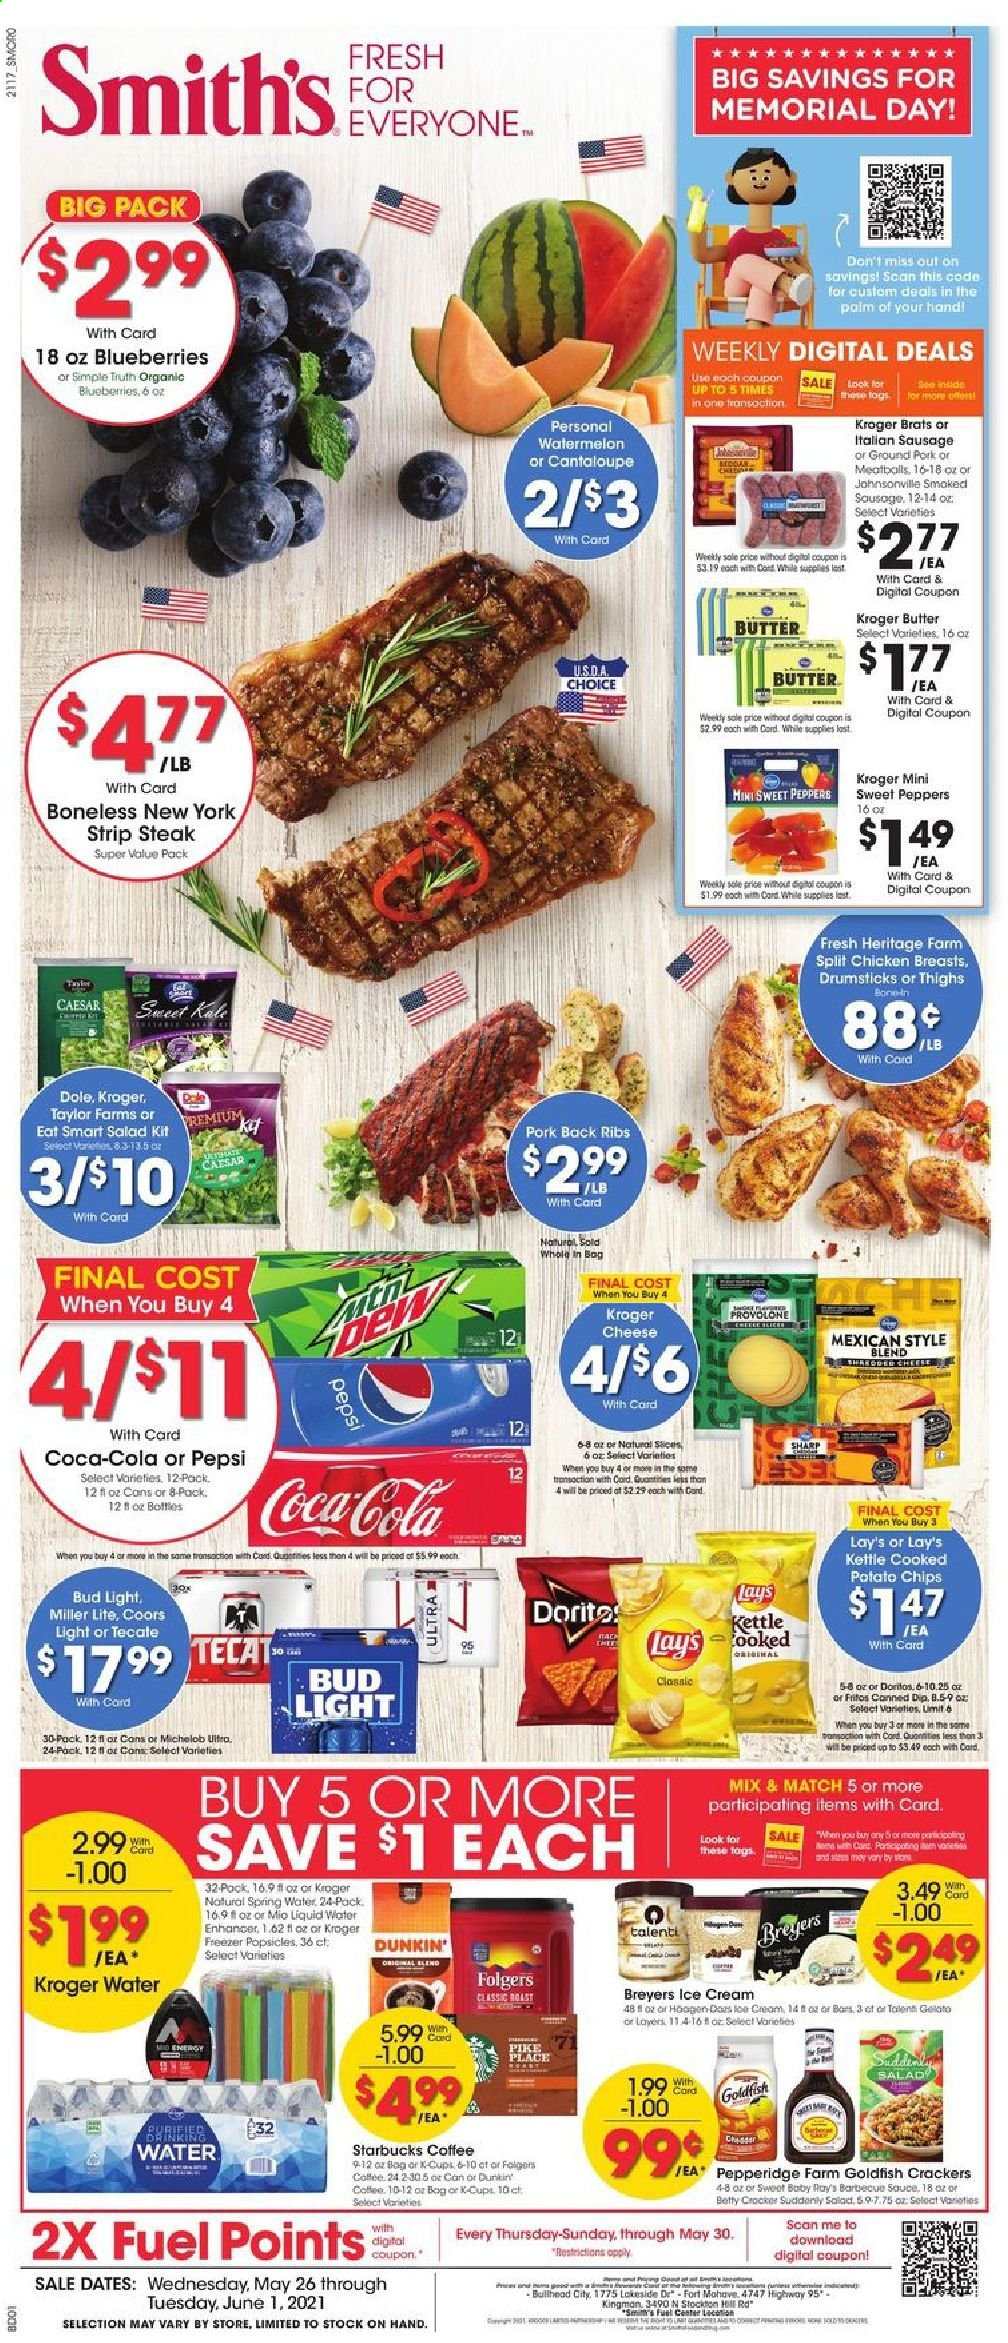 thumbnail - Smith's Flyer - 05/26/2021 - 06/01/2021 - Sales products - sweet peppers, kale, Dole, peppers, blueberries, watermelon, Johnsonville, sausage, italian sausage, cheese, butter, dip, ice cream, Talenti Gelato, crackers, Doritos, Fritos, potato chips, chips, Lay’s, Smith's, Goldfish, Ace, Coca-Cola, Pepsi, spring water, coffee, Starbucks, Folgers, coffee capsules, K-Cups, beer, Miller Lite, Coors, Michelob, Bud Light, chicken breasts, beef meat, steak, striploin steak, ground pork, pork meat, pork ribs, pork back ribs. Page 1.